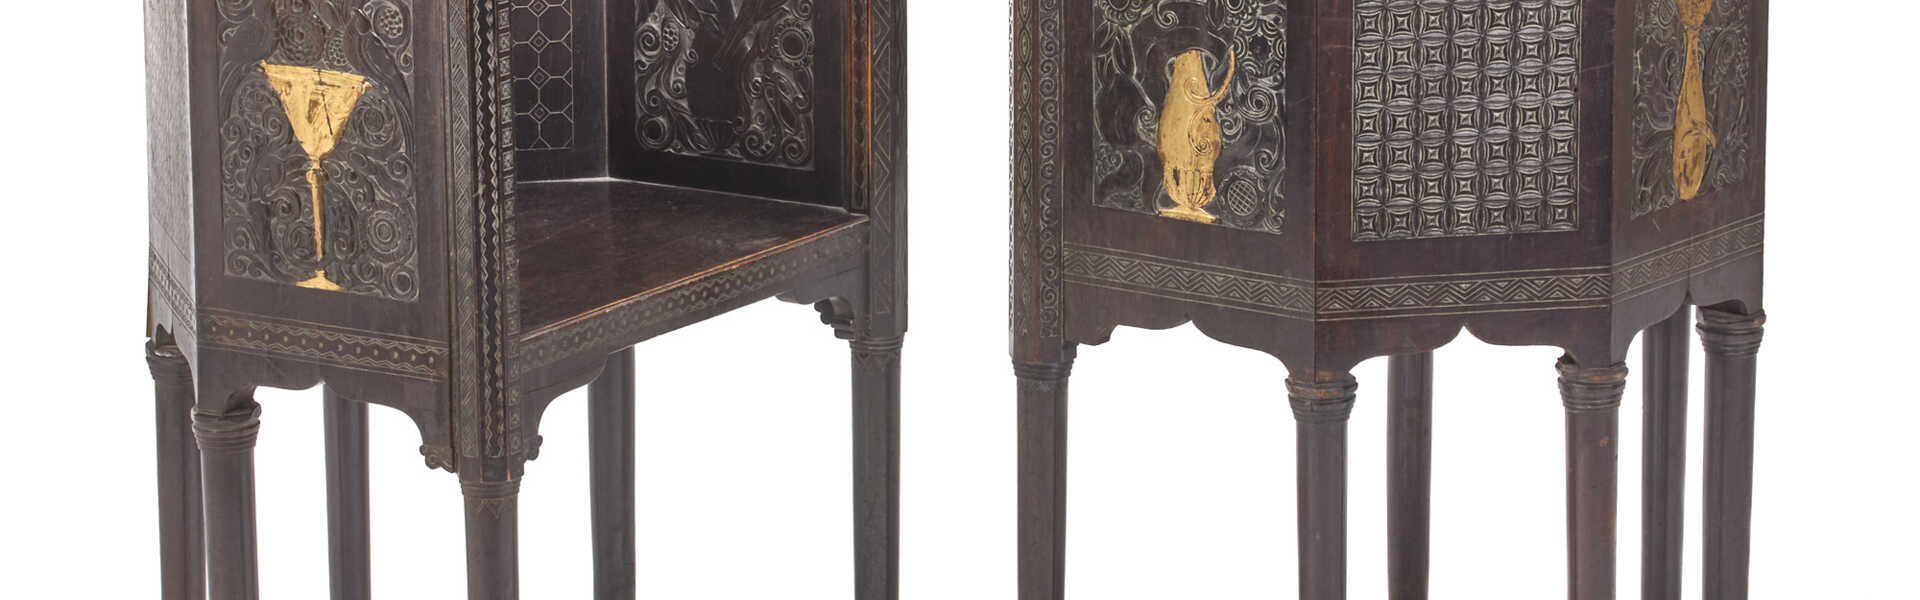 Pair of carved, ebonised and gilded wooden armchairs with partially gilded geometric plant decorations. 1920s. (57x75x46 cm.) (defects and losses)